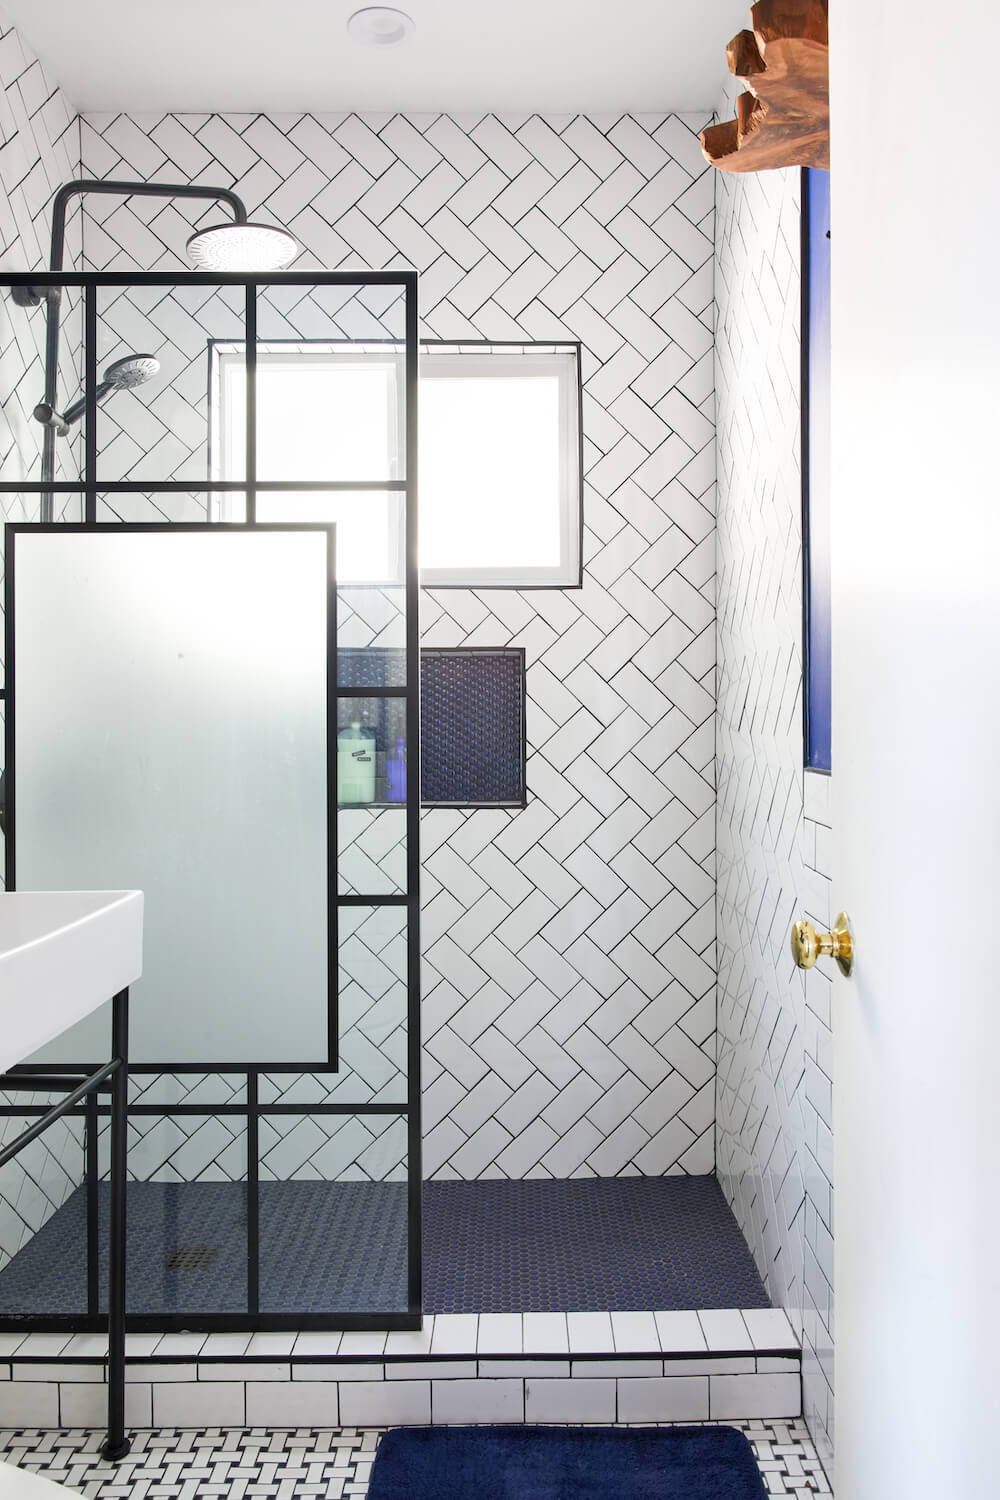 Image of a gut remodel bathroom with walk-in shower and herringbone shower